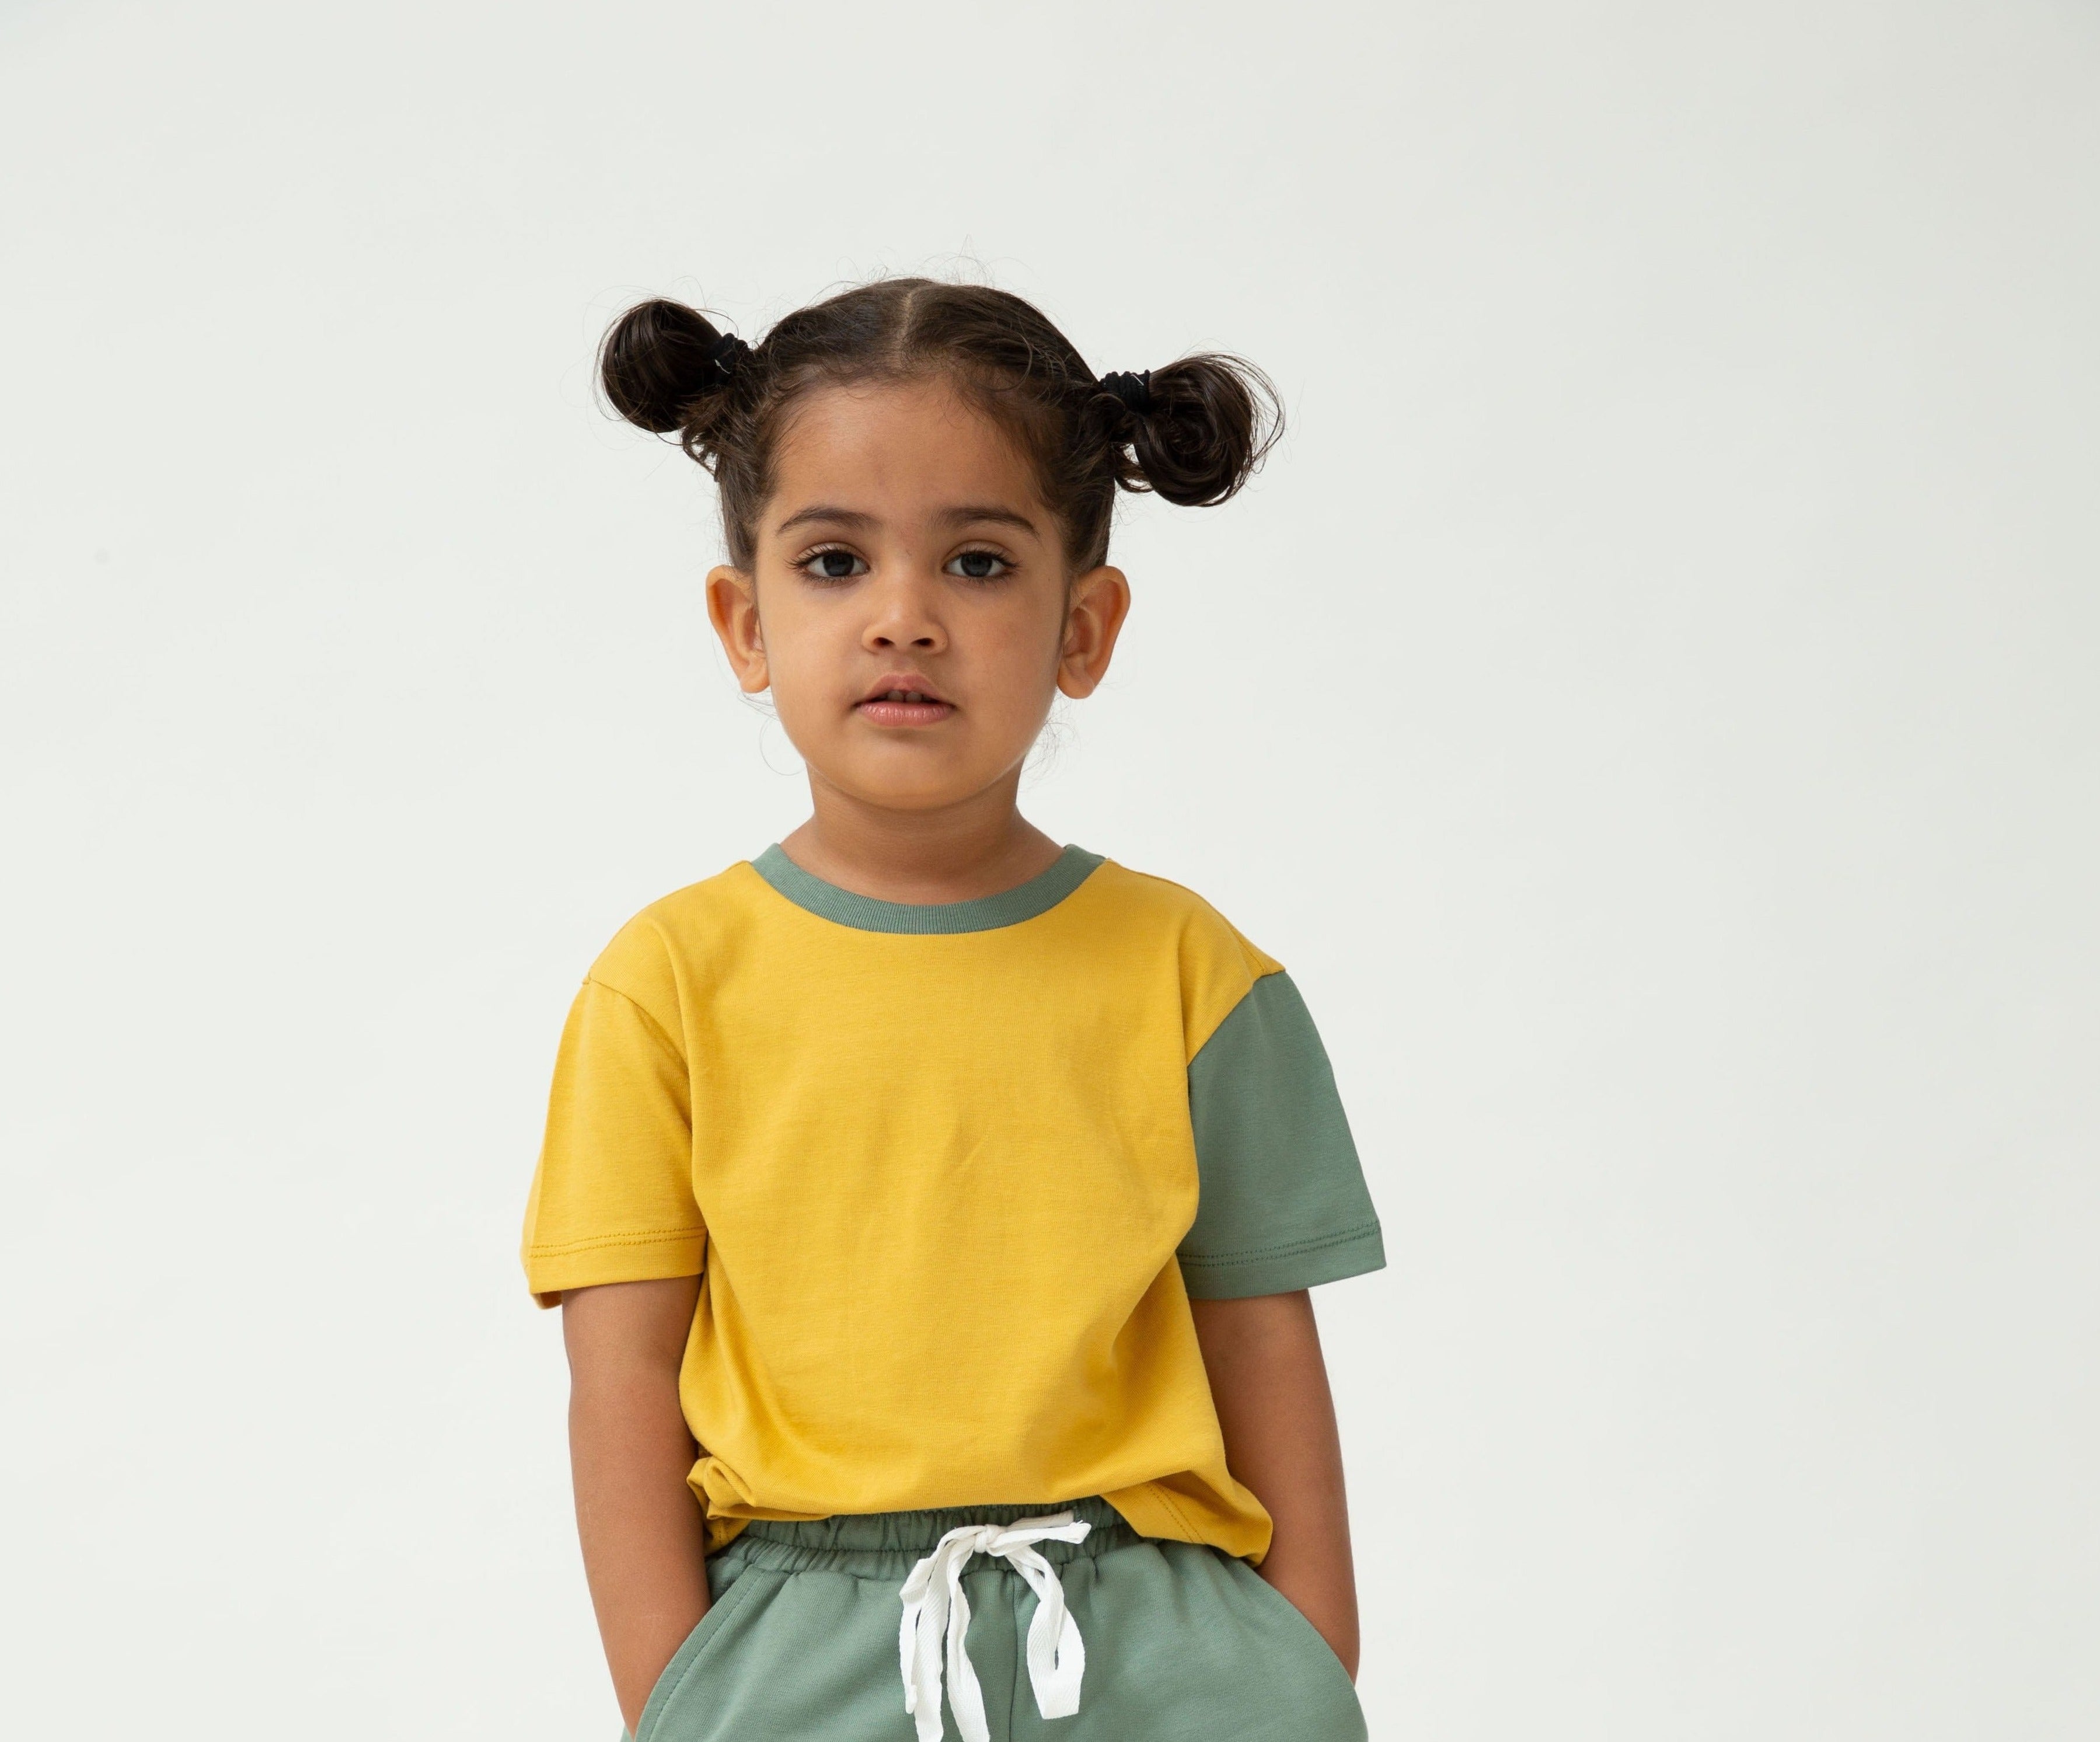 Saltpetre organic, casual unisex kids wear for boys and girls. Organic avocado yellow and green cotton t-shirt. 